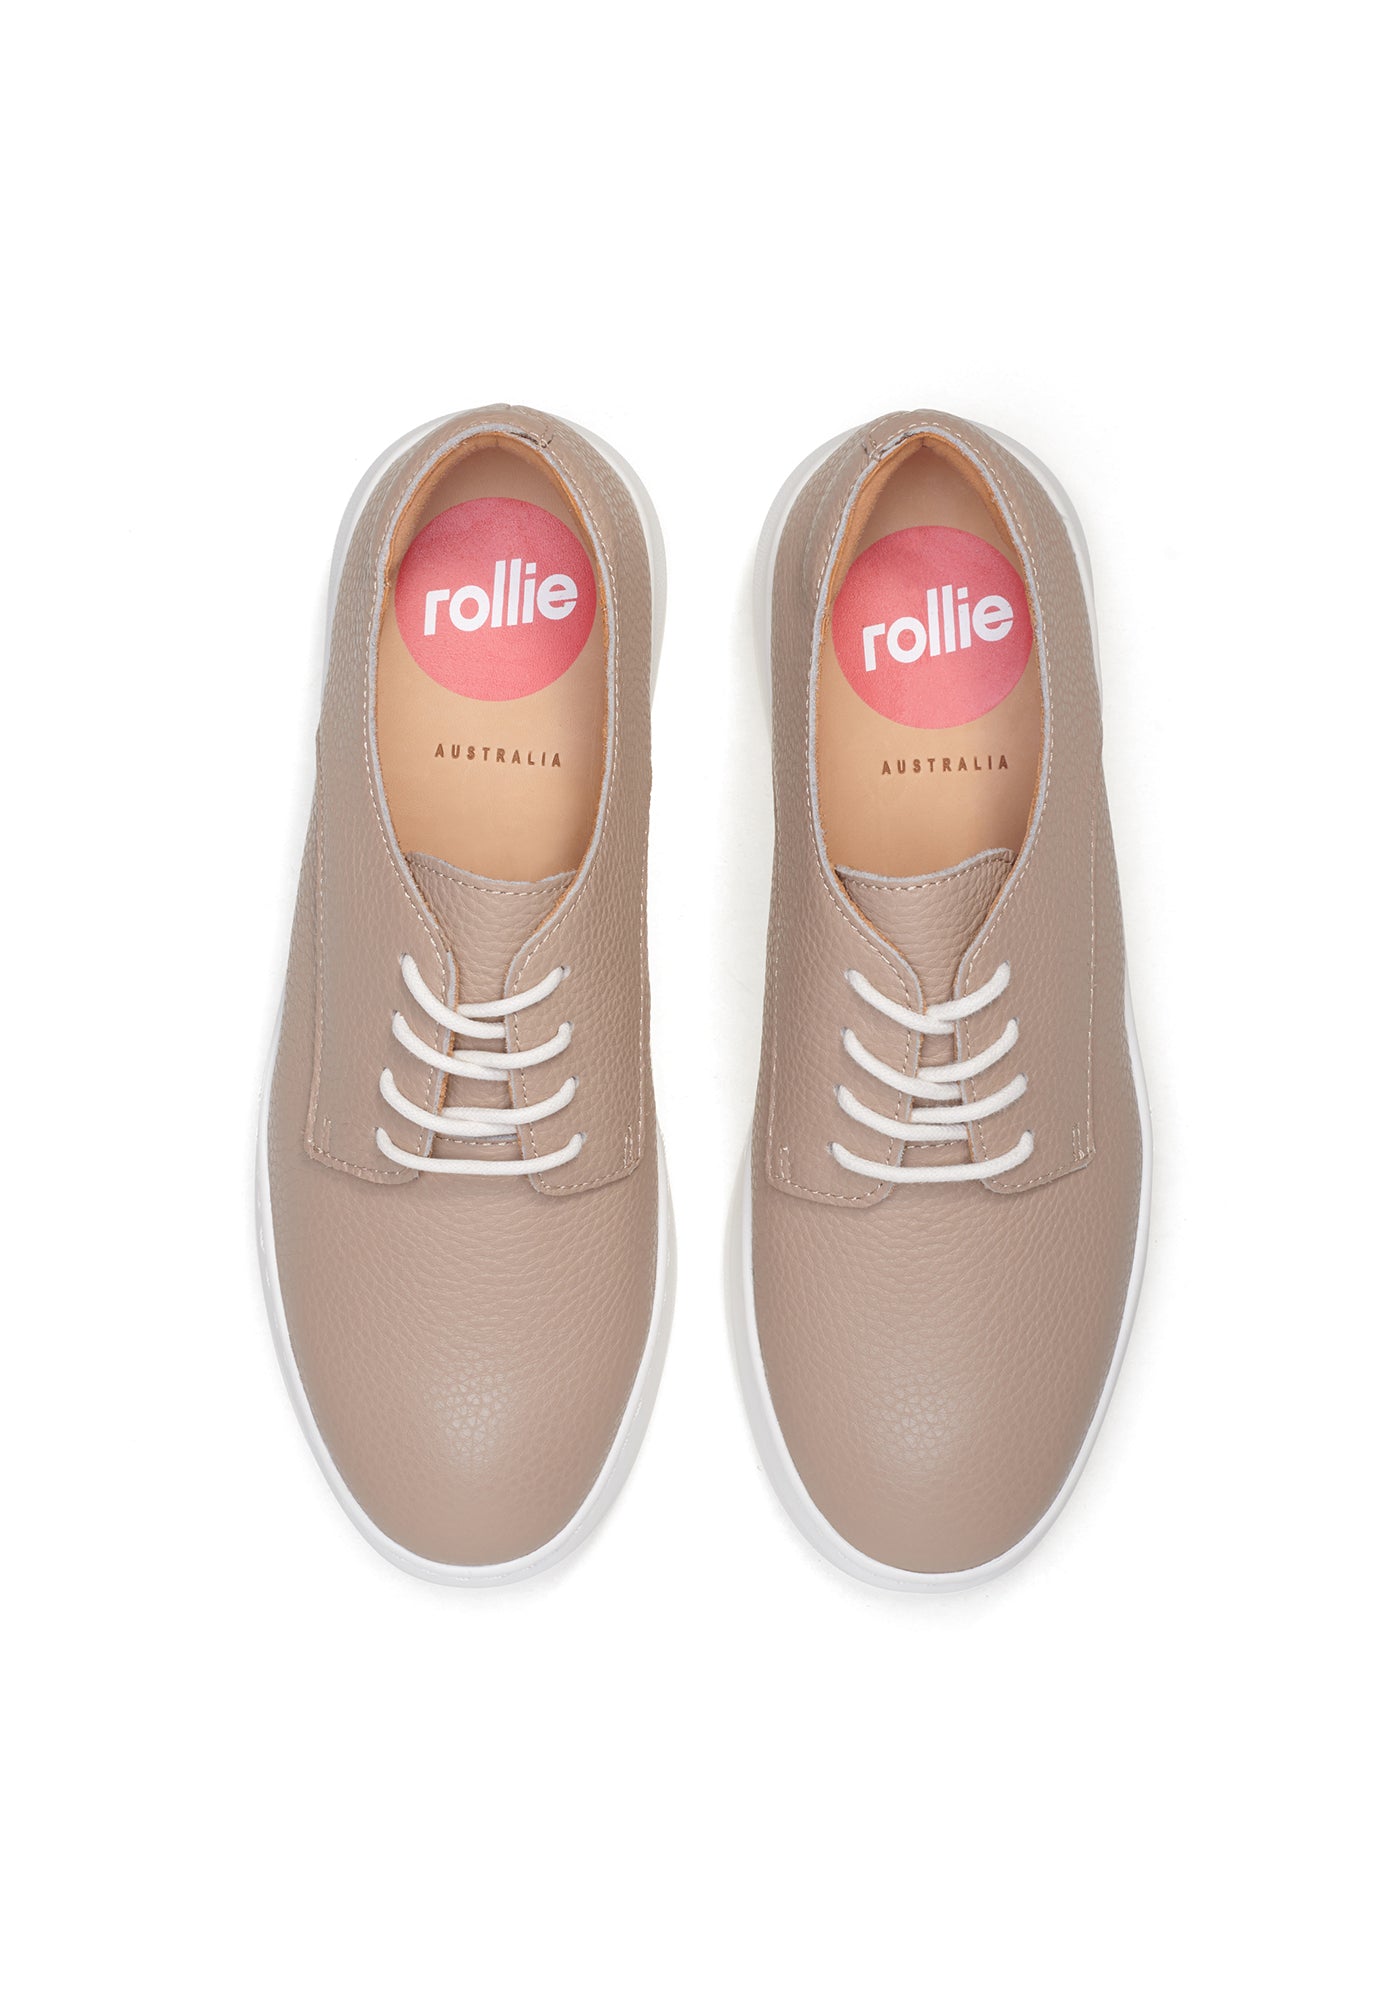 rollie - derby city - taupe tumble